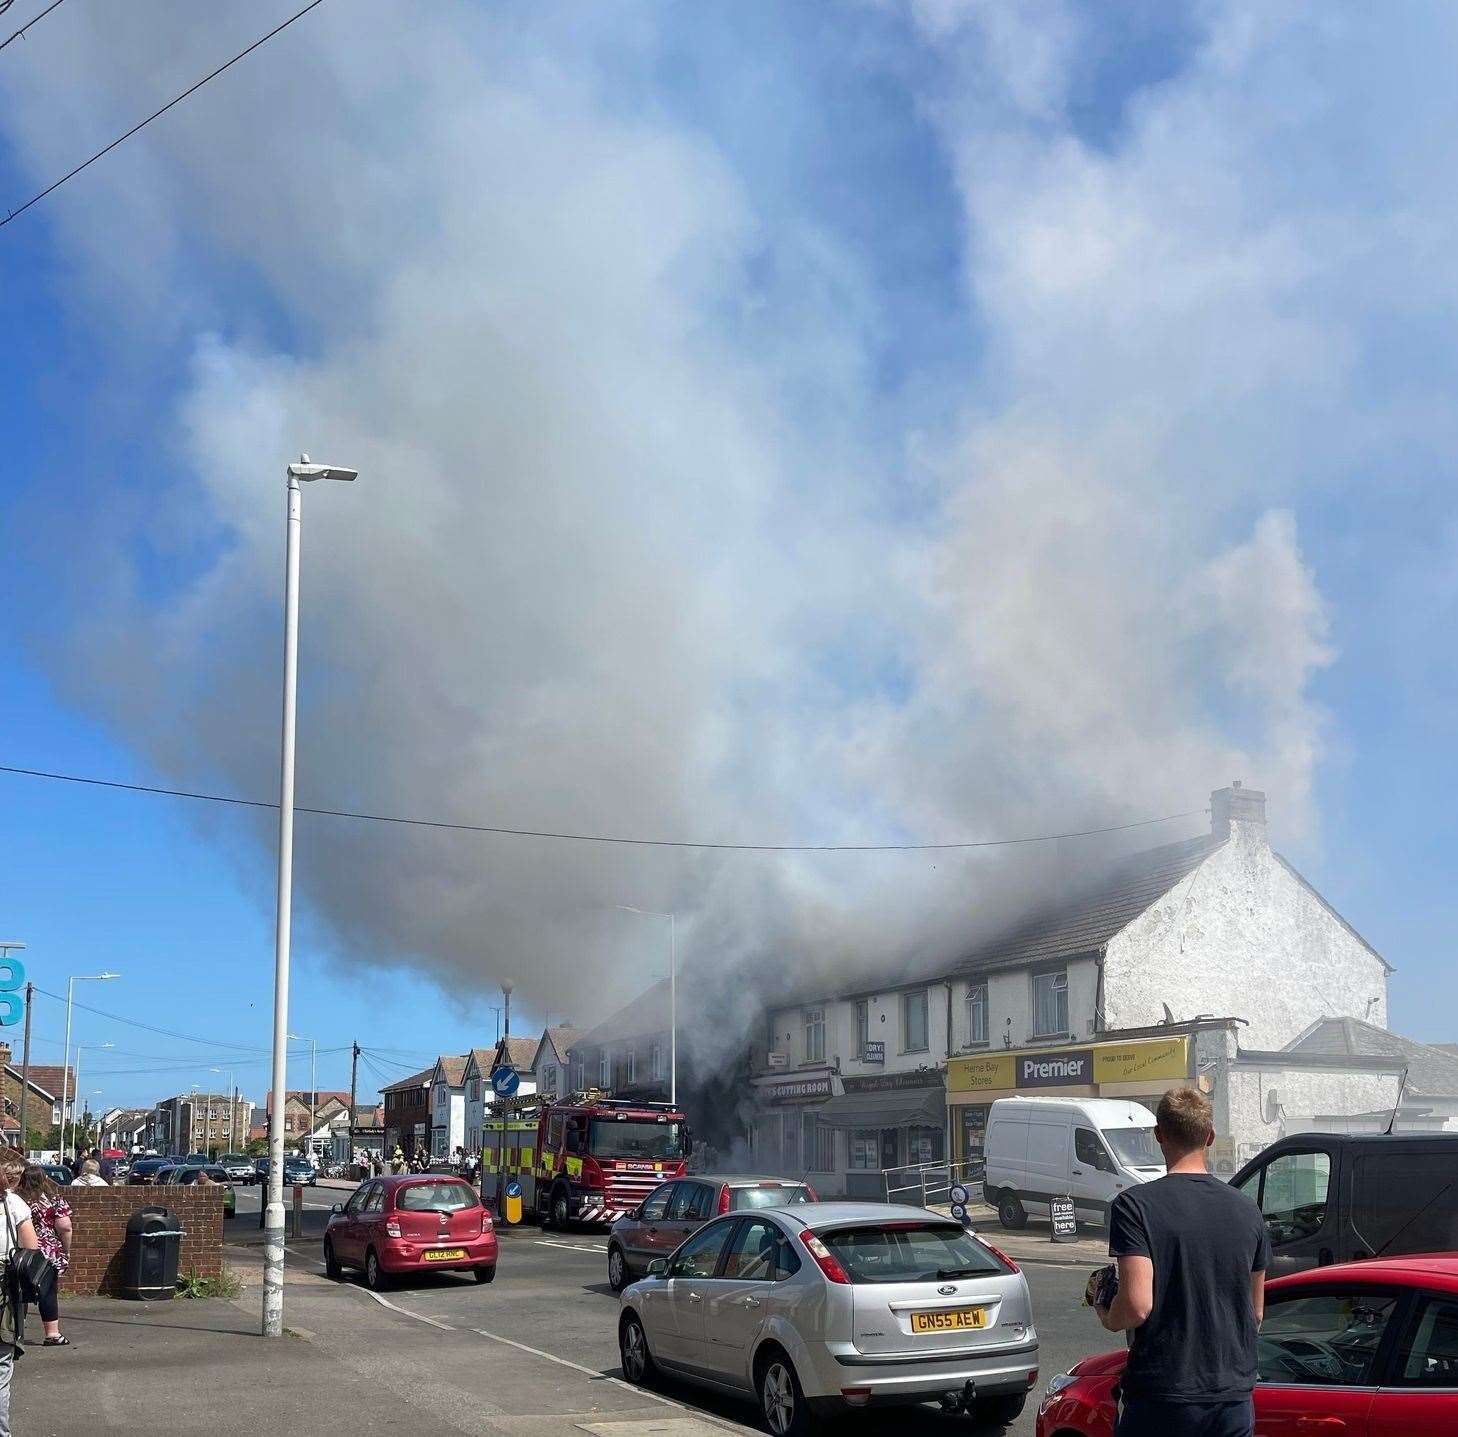 Smoke coming from the kebab shop in Sea Street, Herne Bay. Picture: Karen Goldsmith